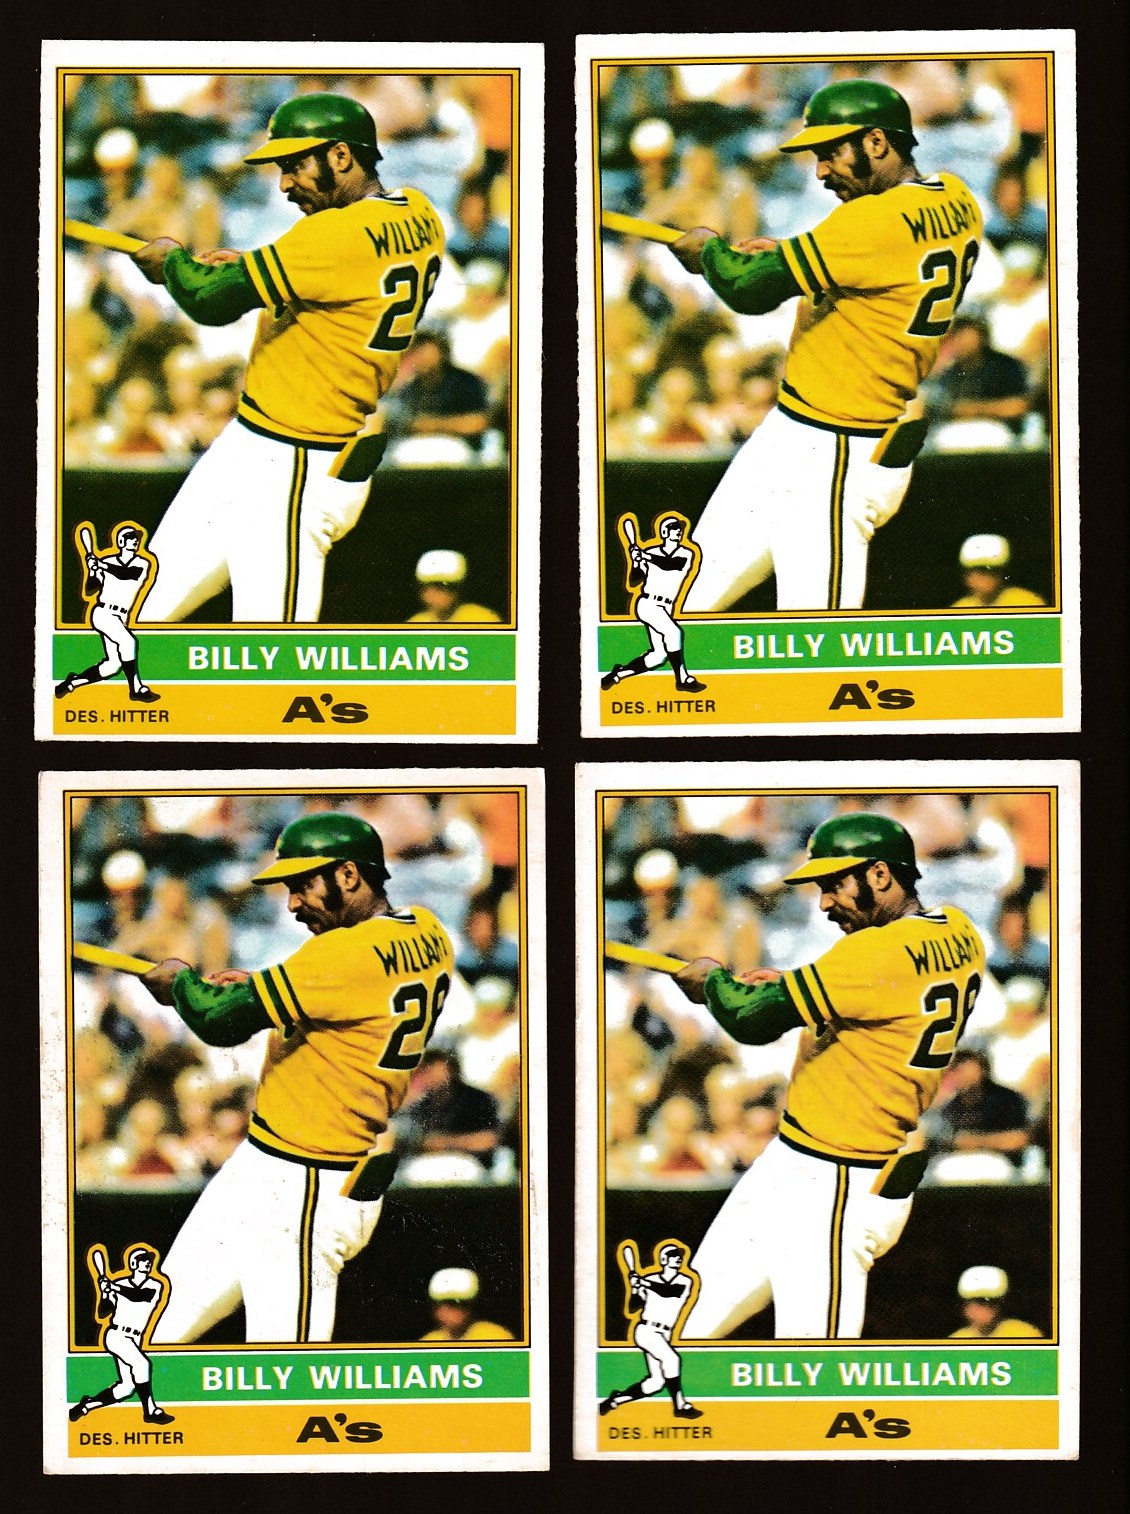 1976 O-Pee-Chee/OPC #525 Billy Williams (A's) Baseball cards value